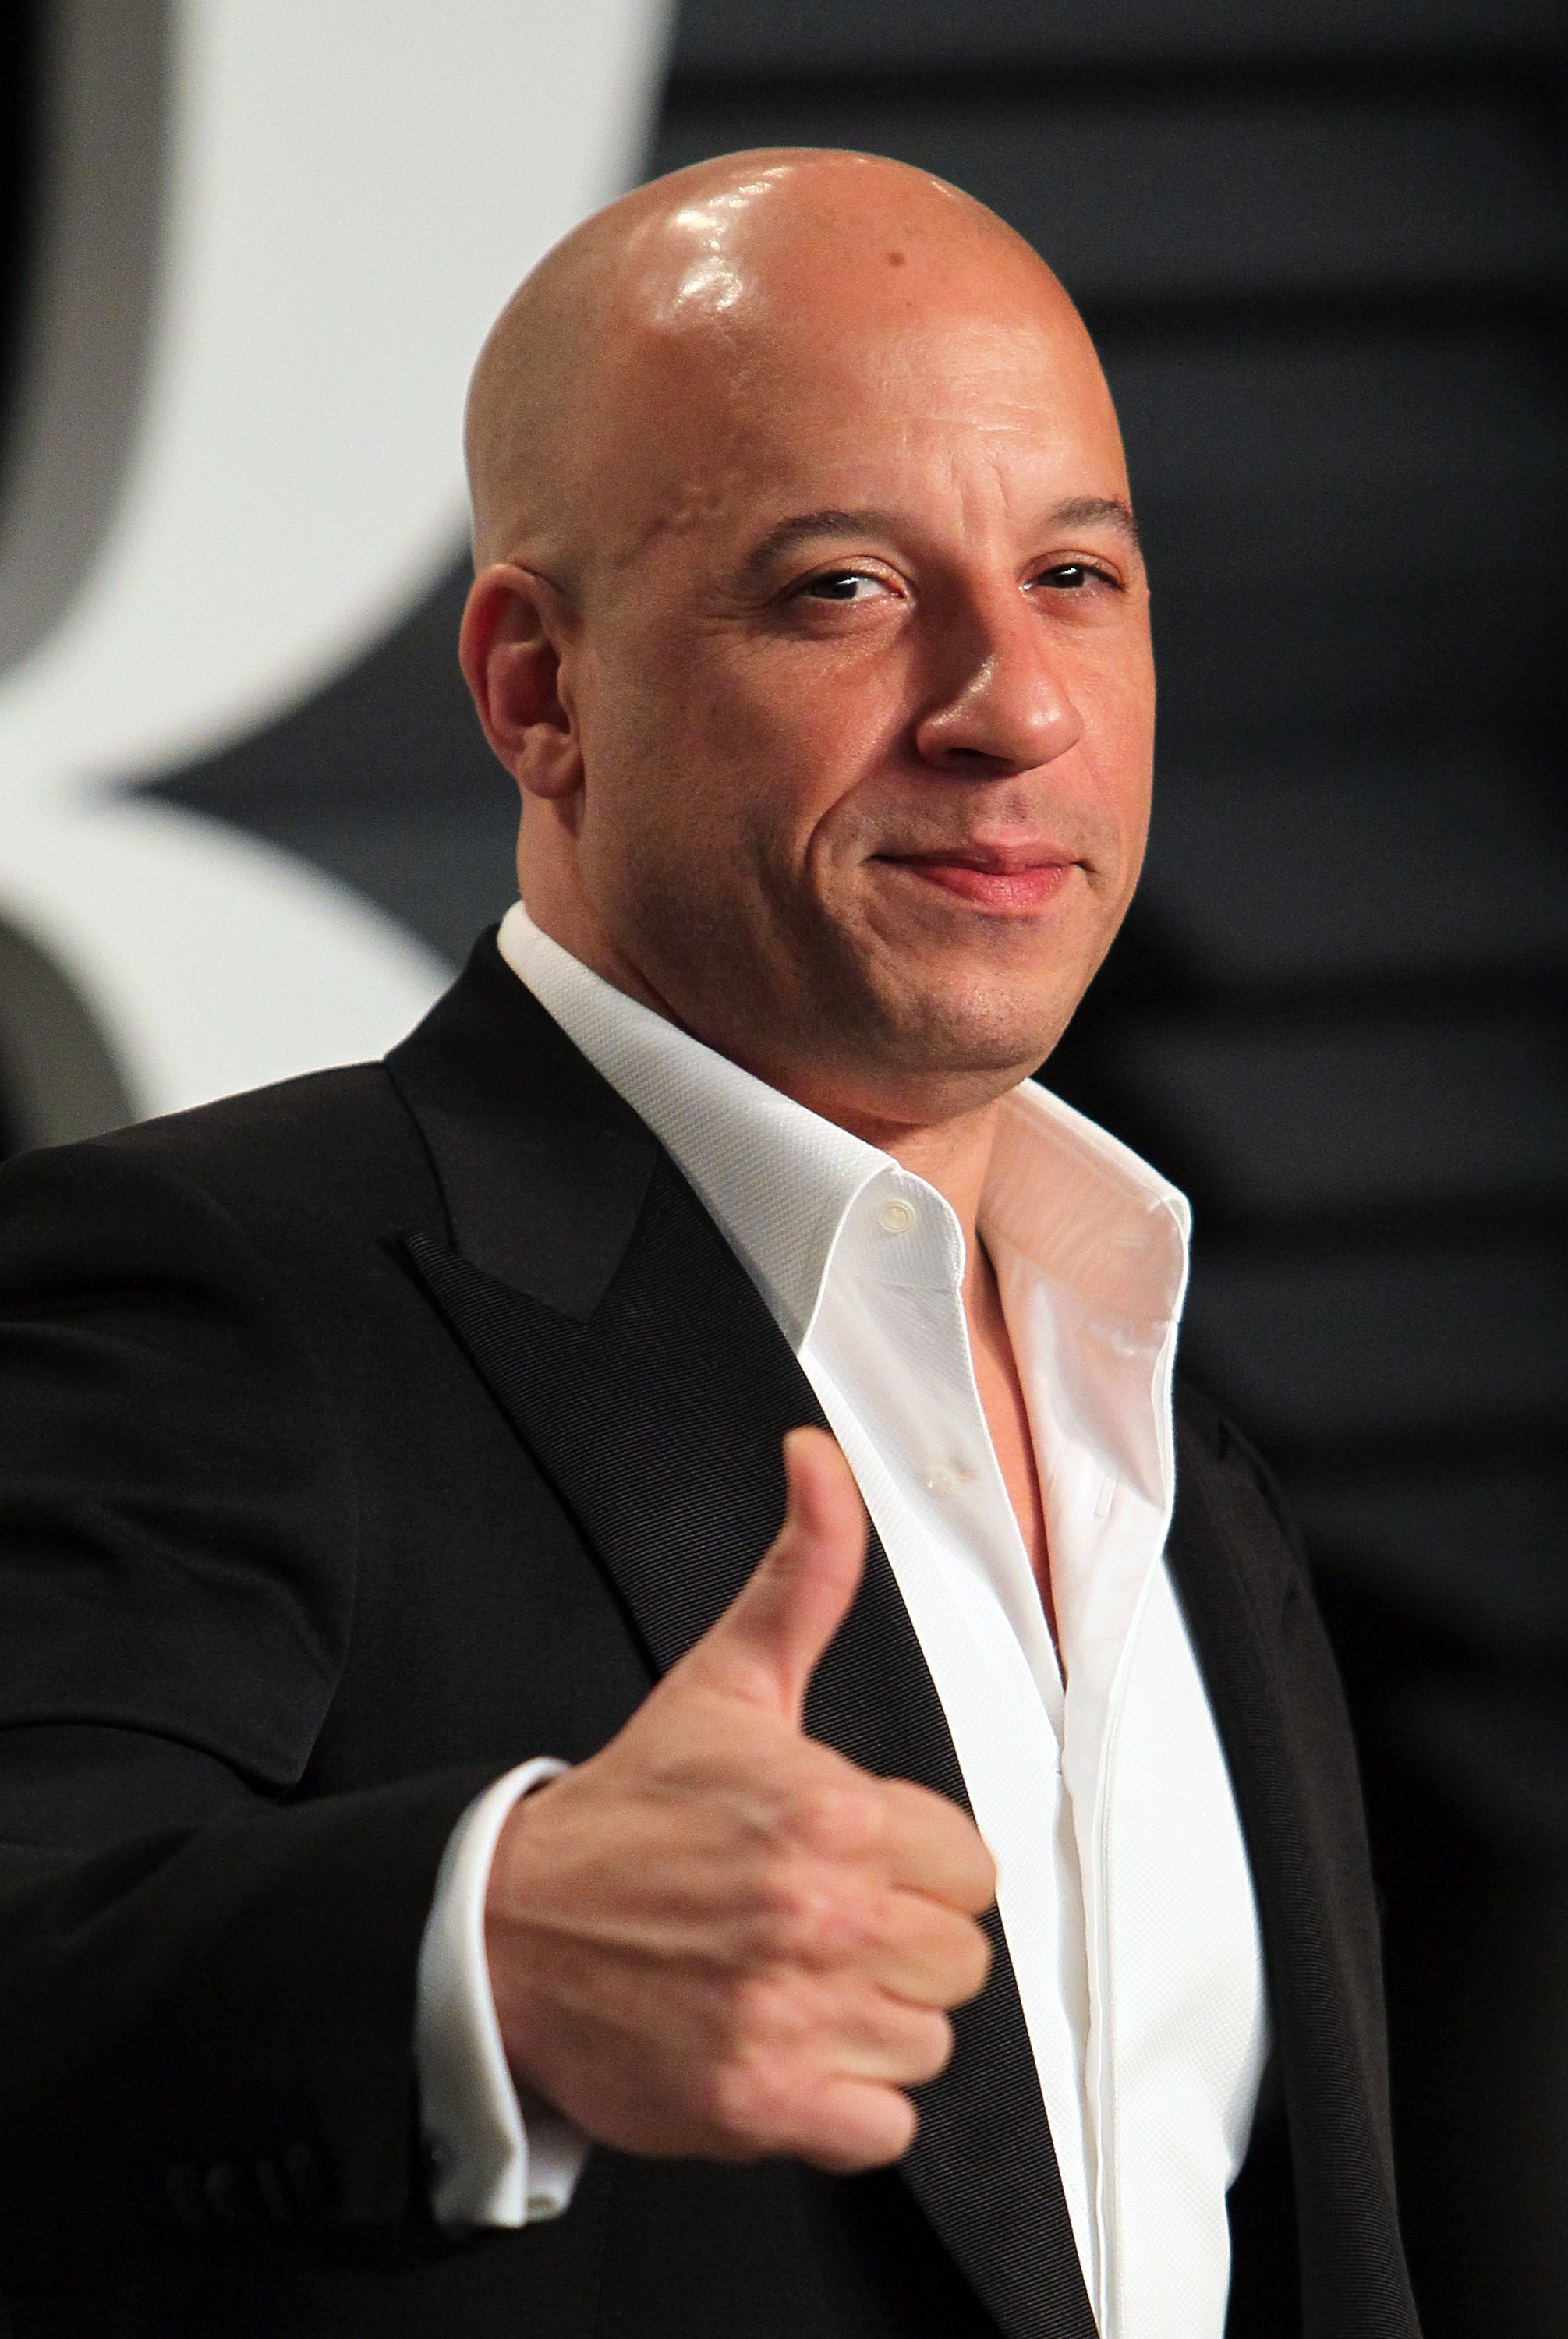 Actor Vin Diesel attends the 2015 Vanity Fair Oscar Party hosted by Graydon Carter at the Wallis Annenberg Center for the Performing Arts on Feb. 22, 2015 in Beverly Hills. (David Livingston—Getty Images)